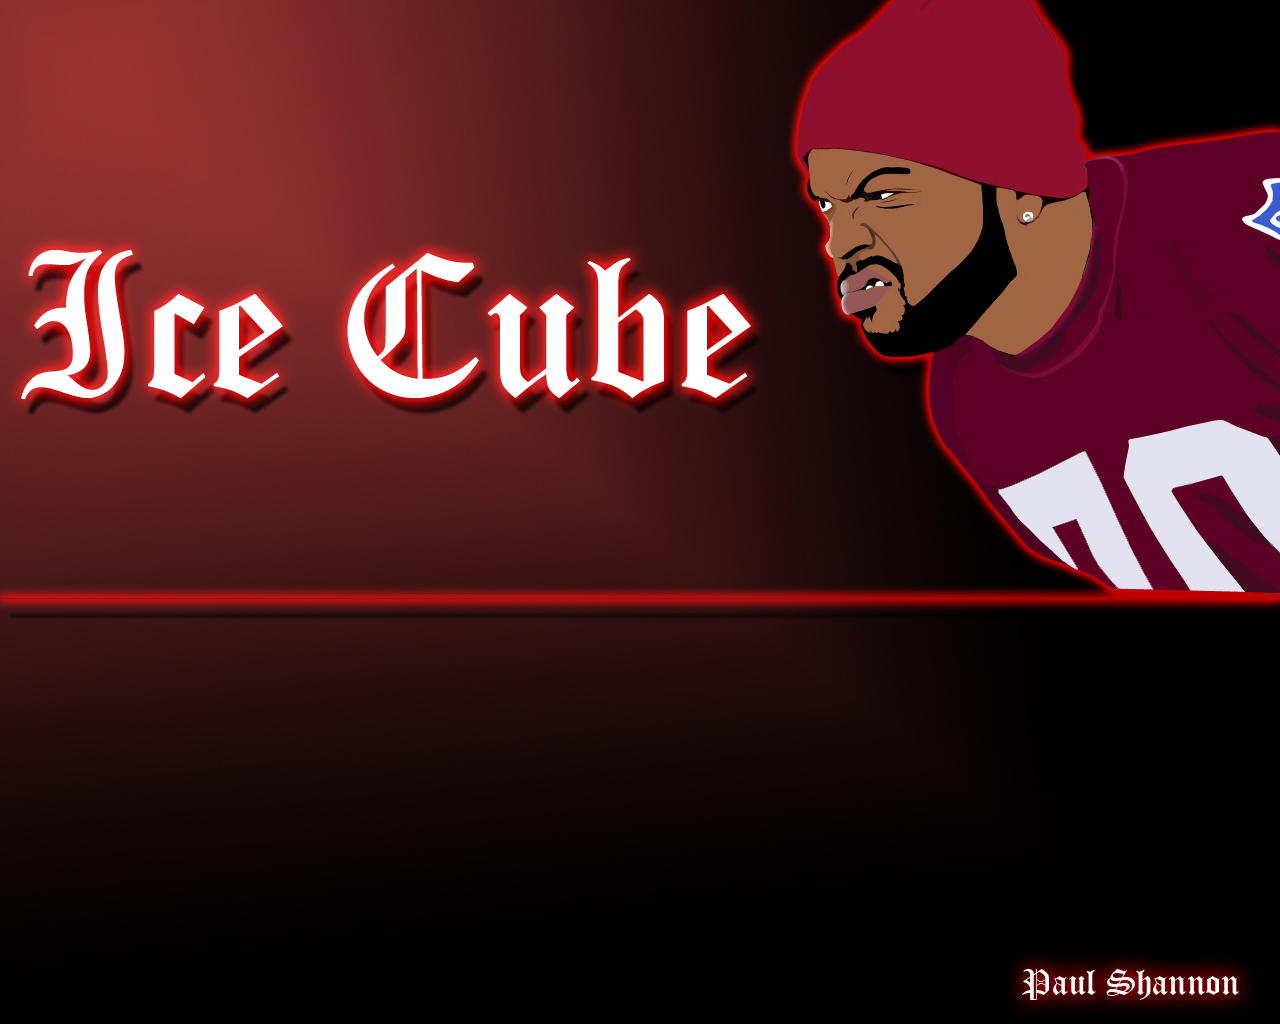 Ice cube wallpaper by luap on